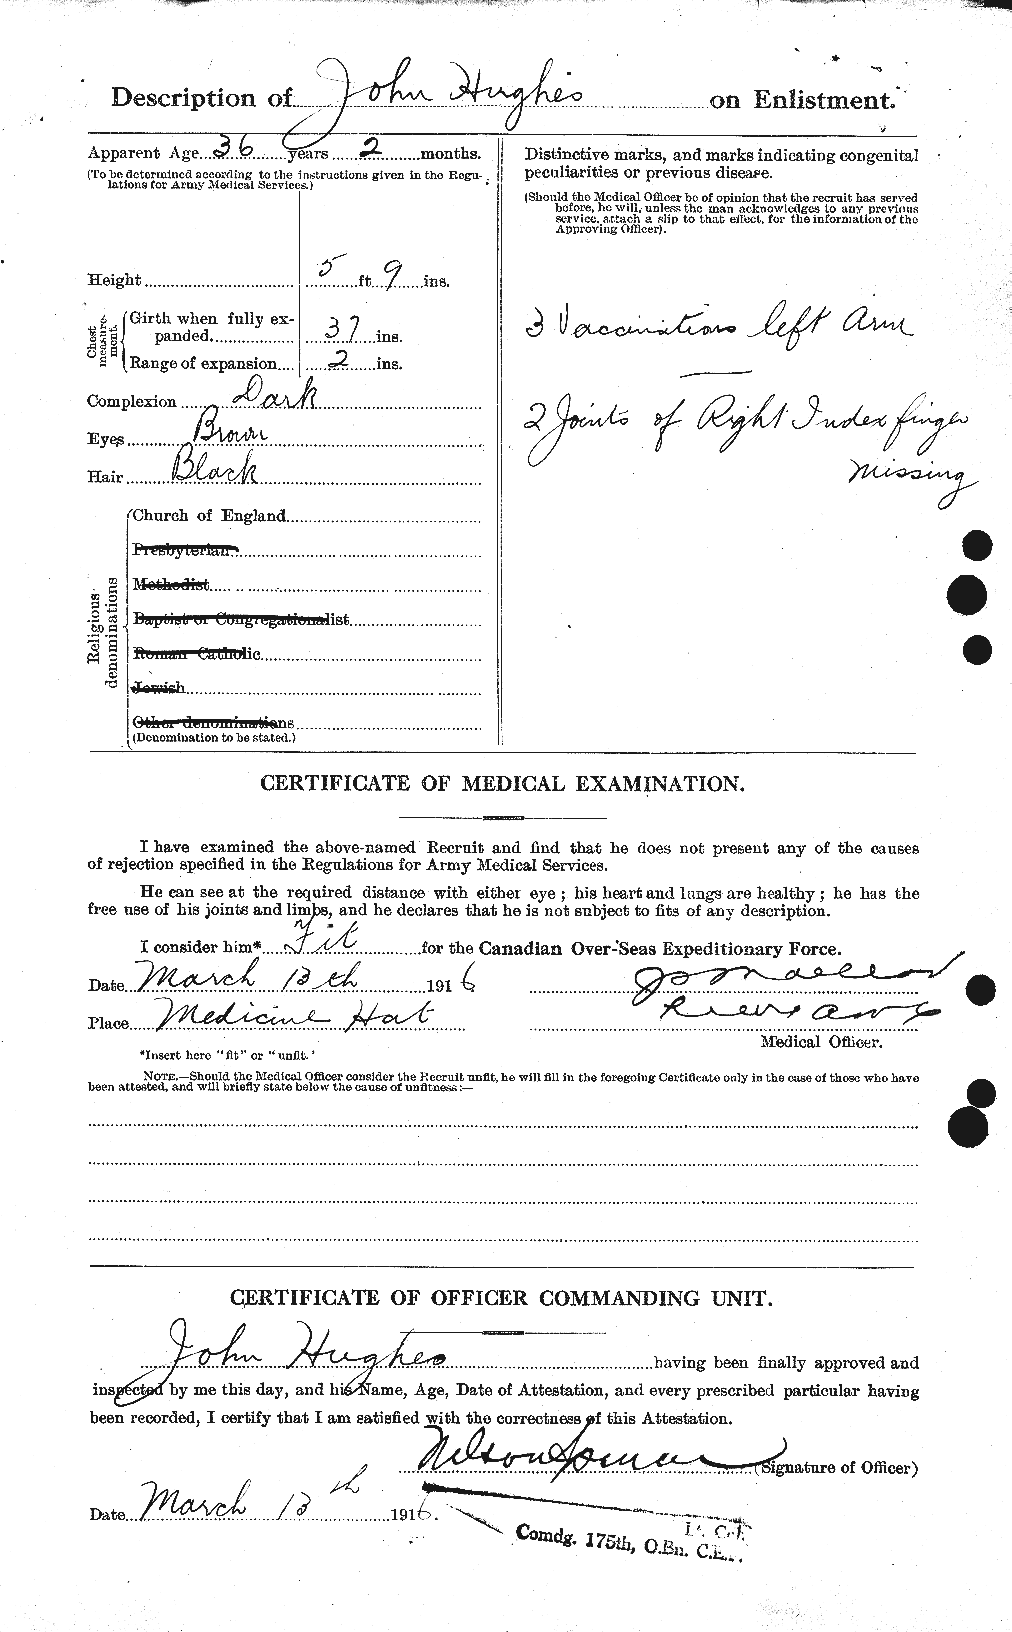 Personnel Records of the First World War - CEF 403998b